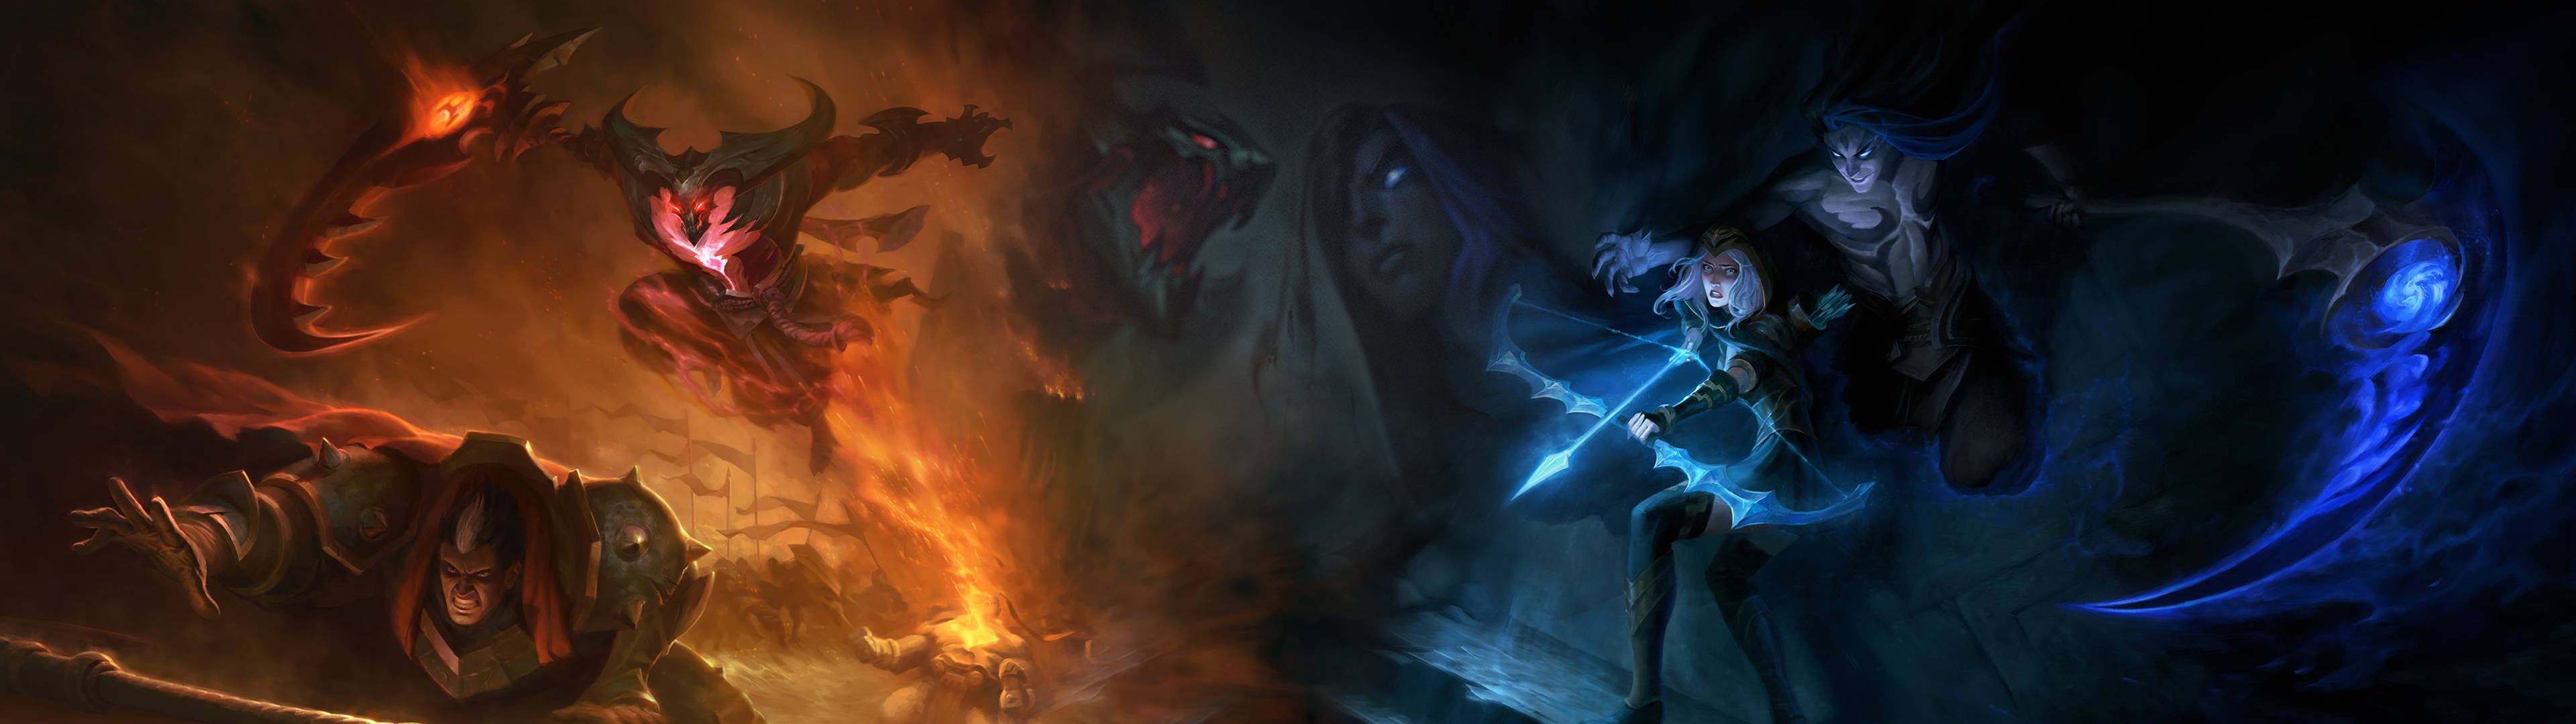 Dual Screen Flame Or Frost League Of Legends Wallpaper